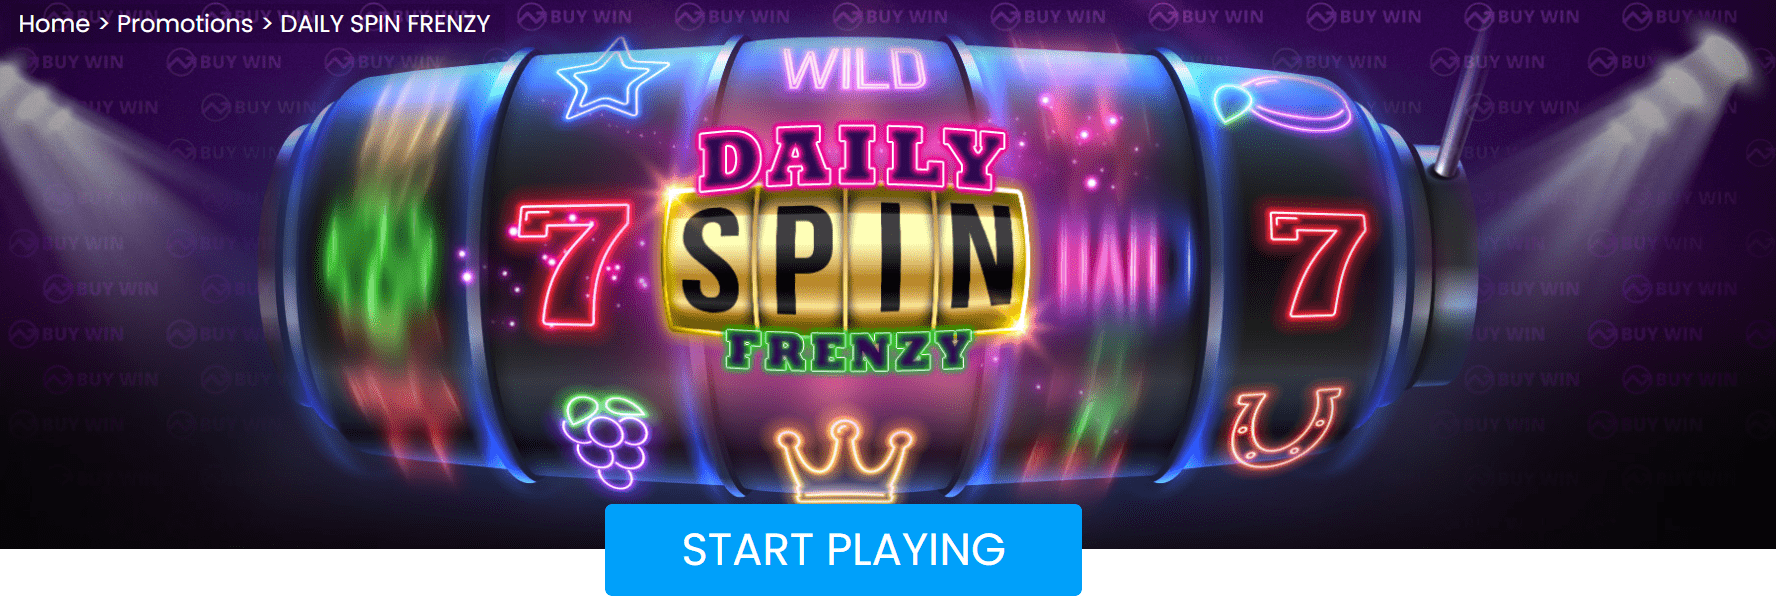 mr play uk daily free spins